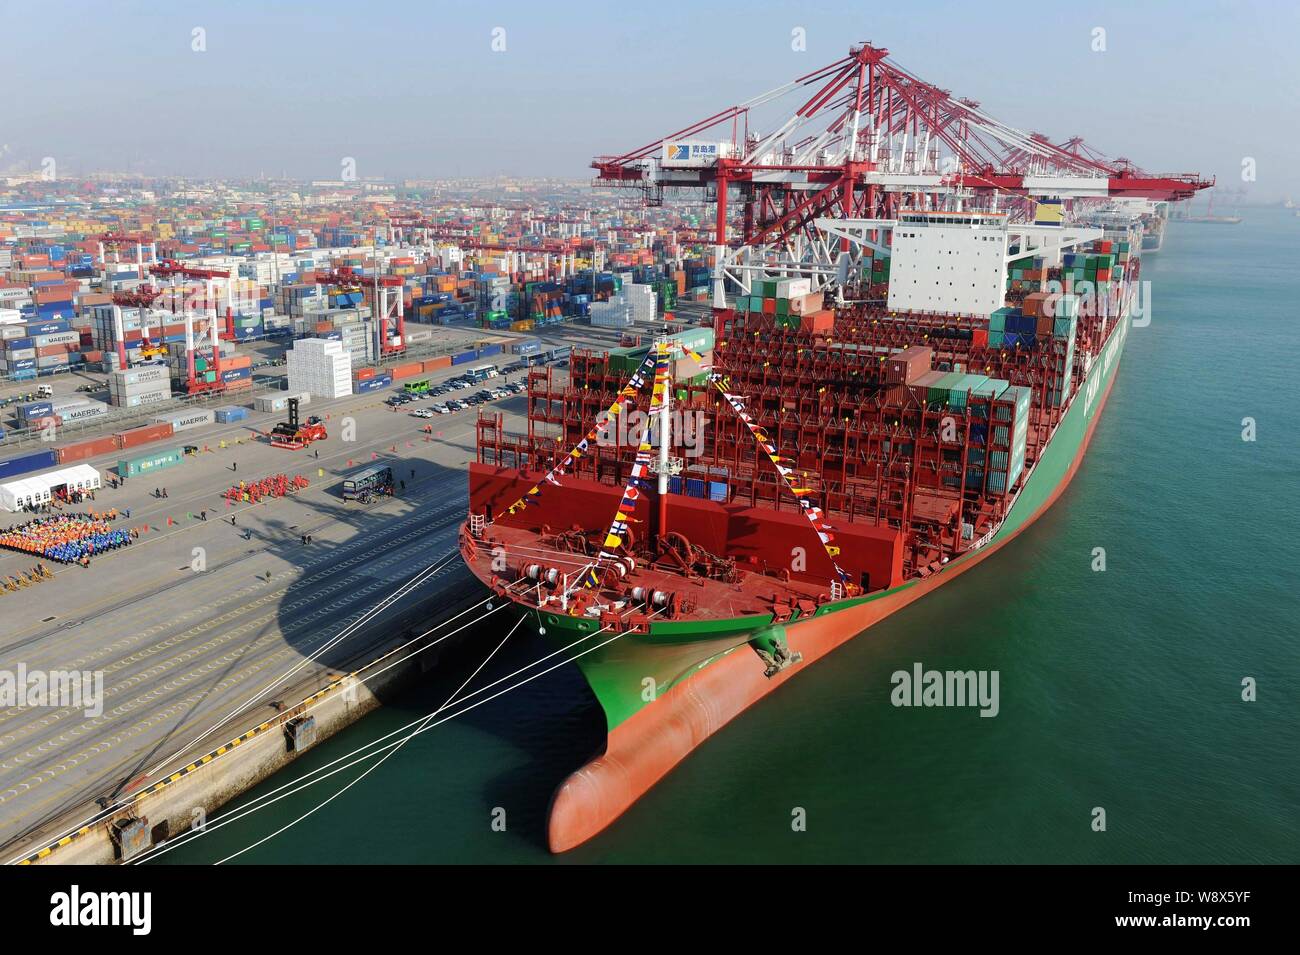 The world's largest container ship, CSCL (China Shipping Container Lines Co. Ltd) Globe, to be loaded with containers berths on a quay at the Port of Stock Photo